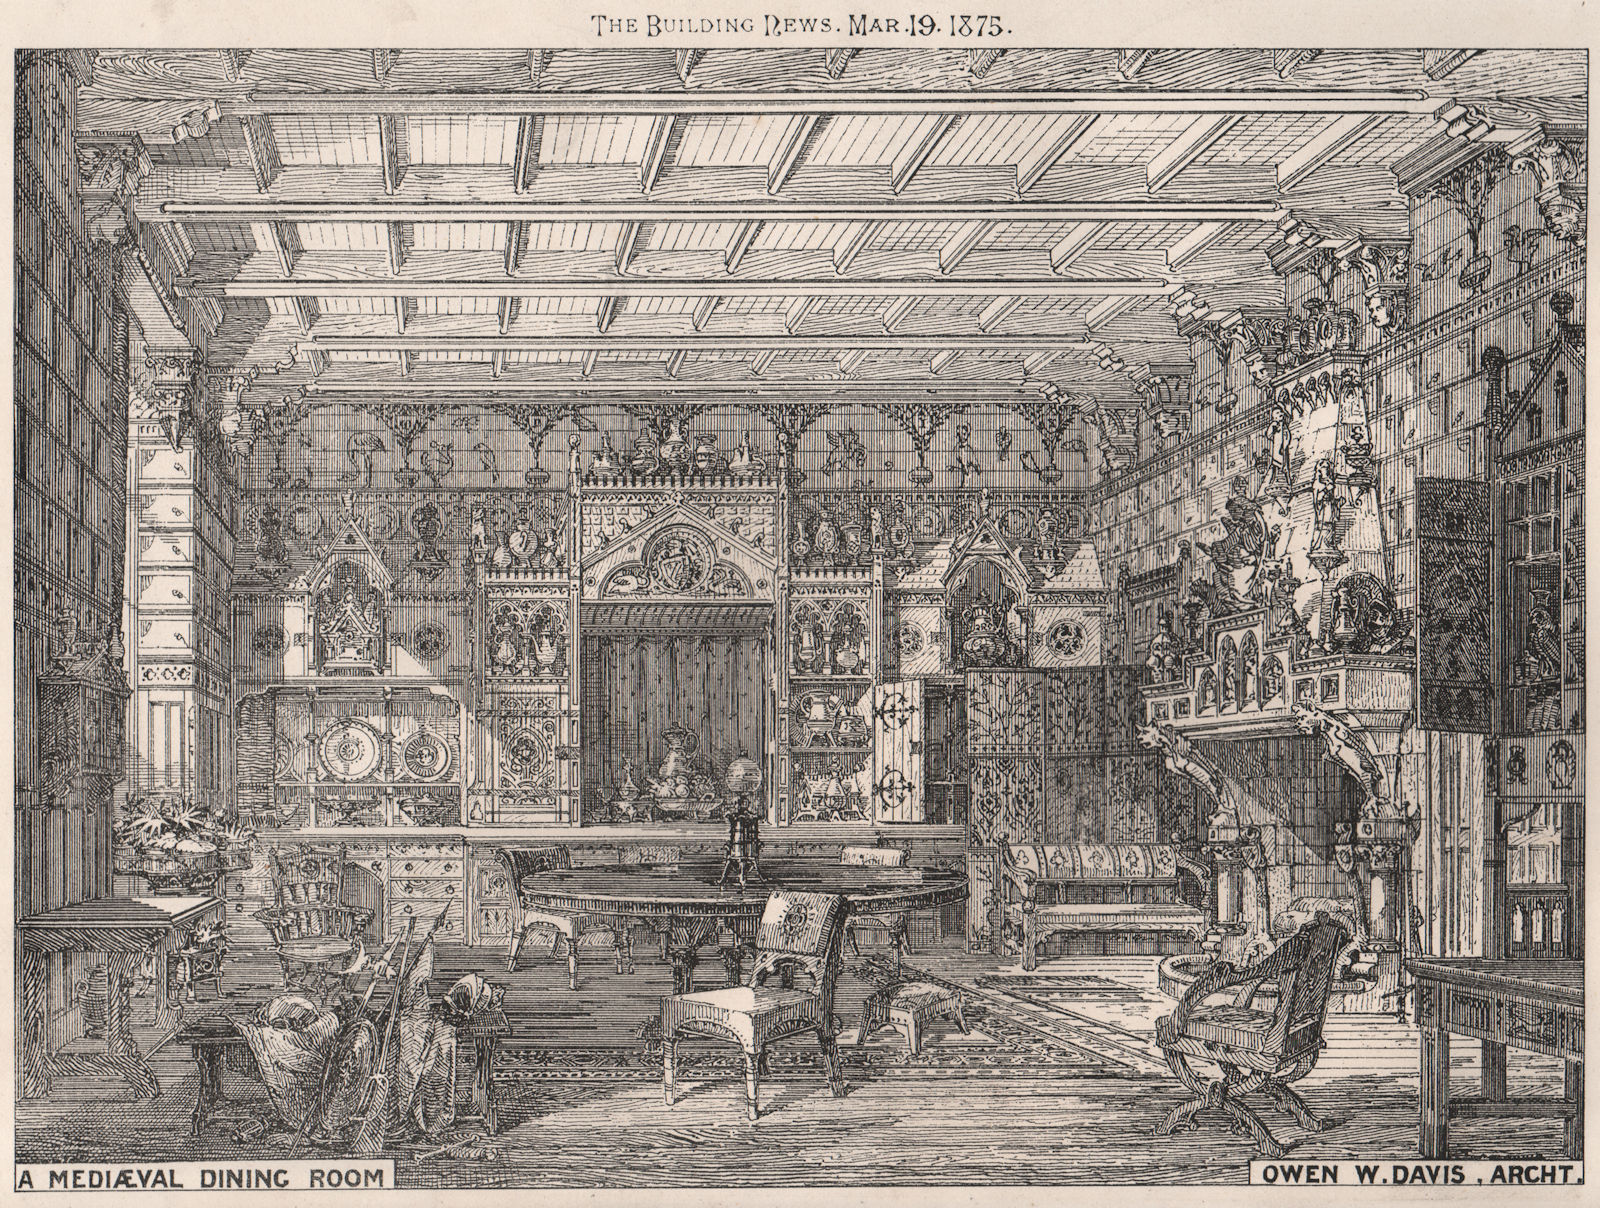 Associate Product A mediaeval dining room; Owen W. Davis, Architect. Architecture 1875 old print